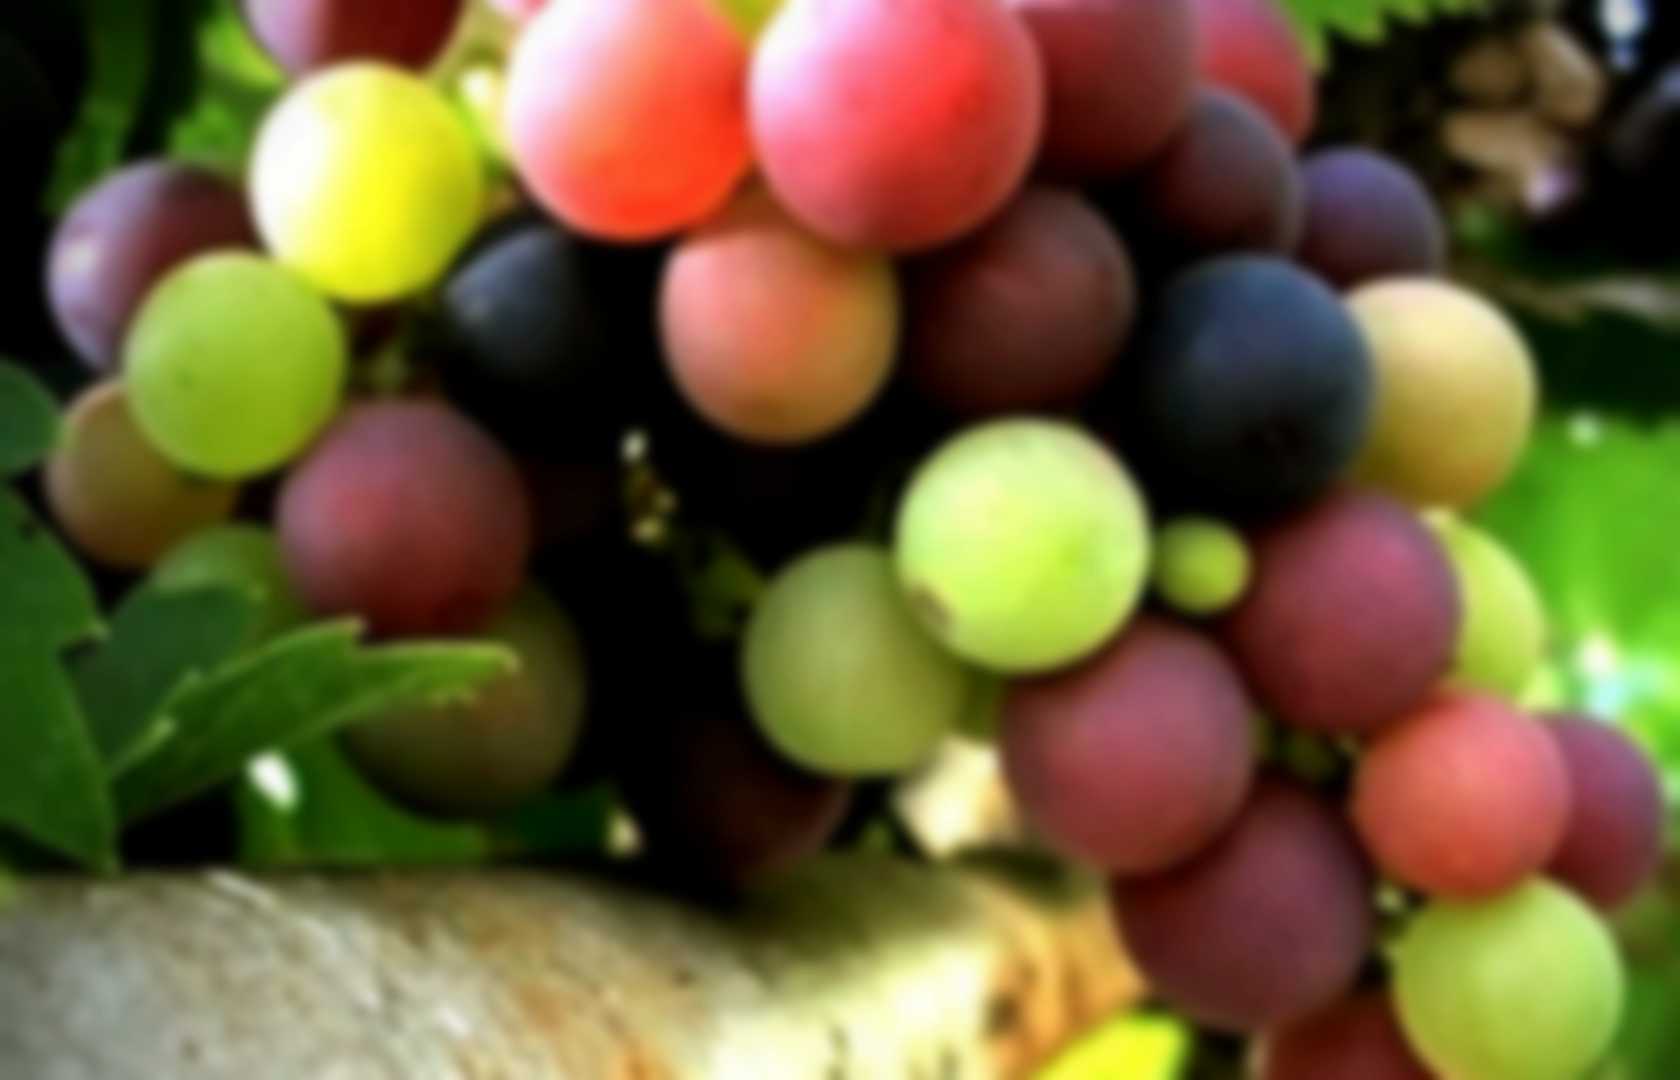 Grapes - Fruit | Pearltrees